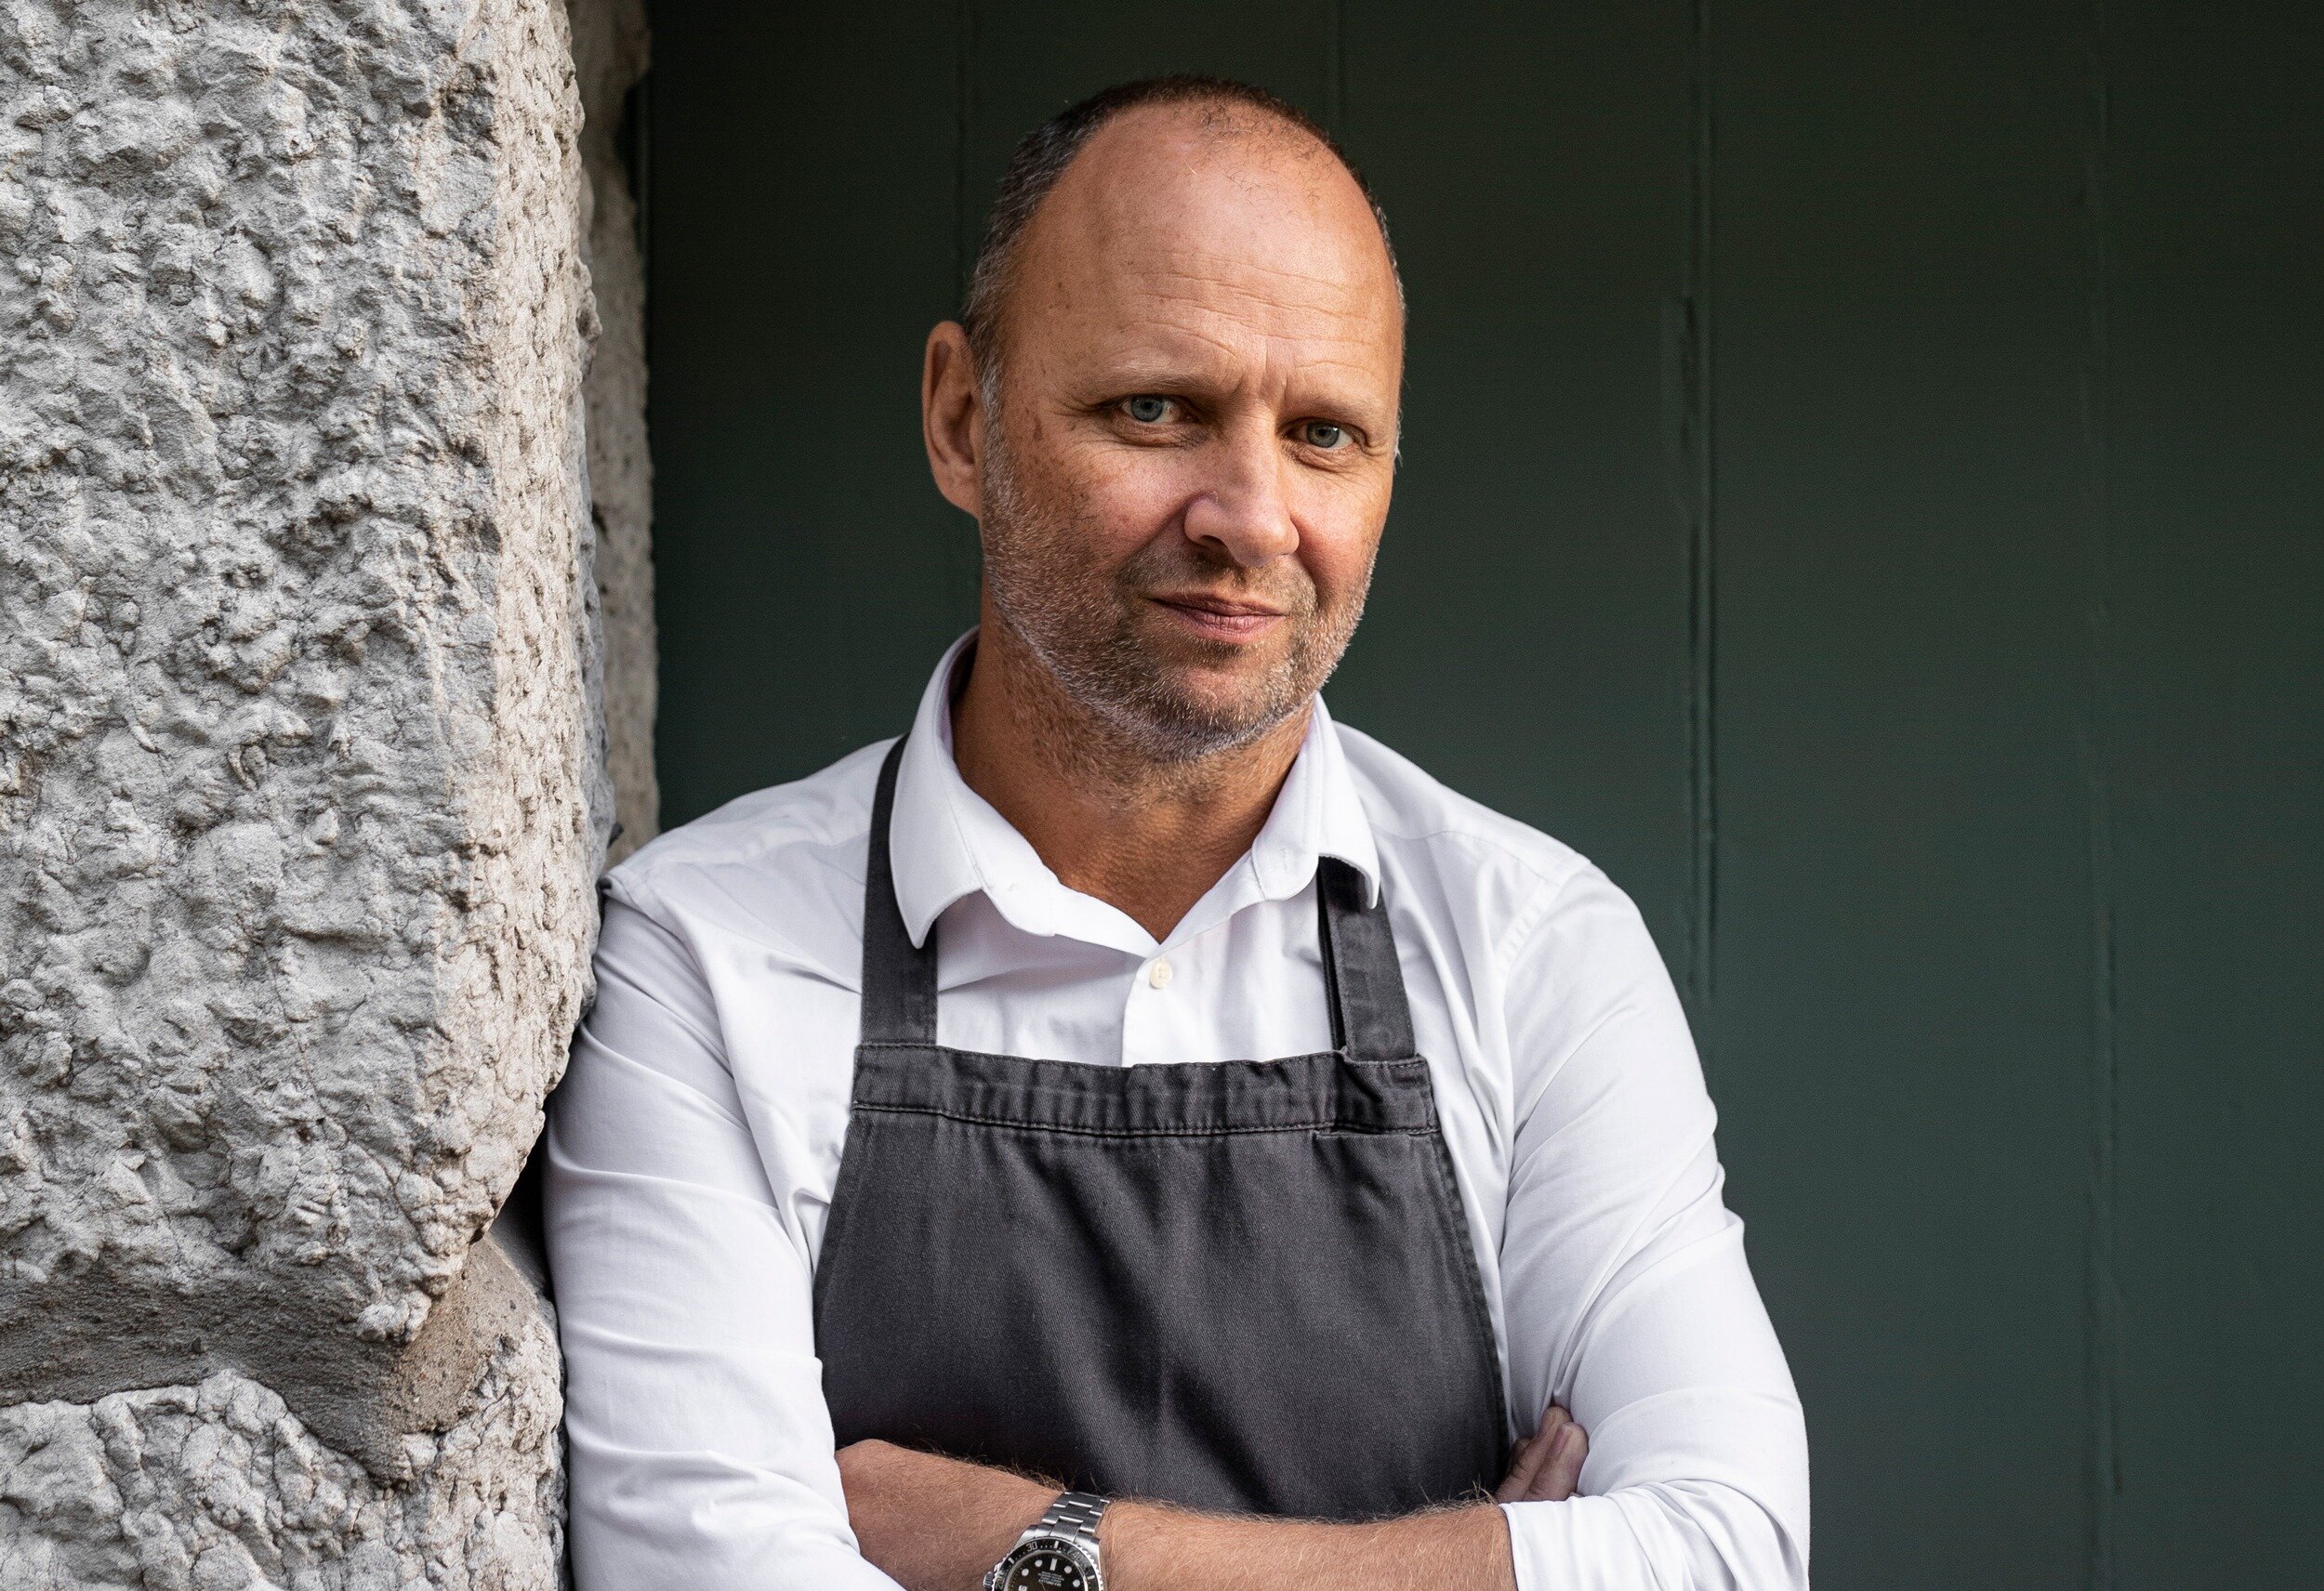 Simon Rogan and Adam Handling win top gongs at Craft Guild of Chefs’ Awards